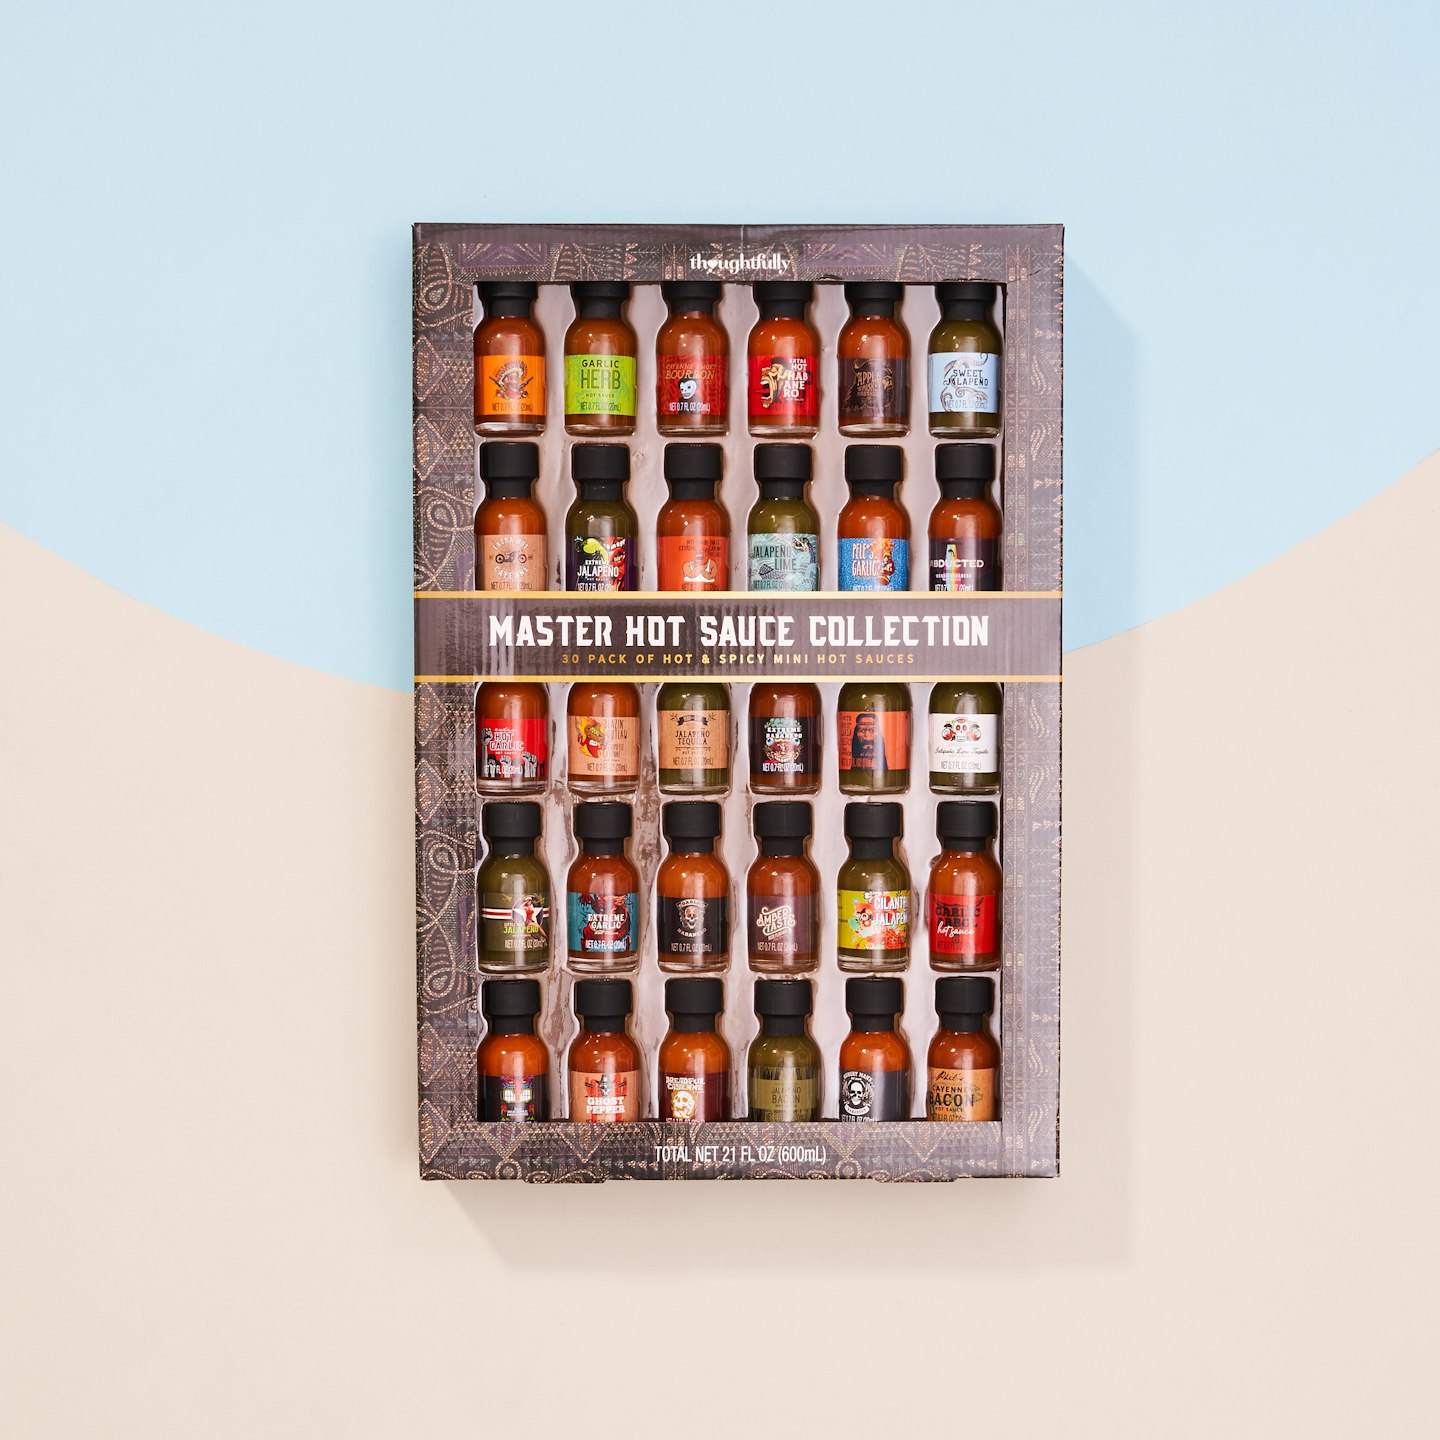 Master Hot Sauce Collection, Amazon